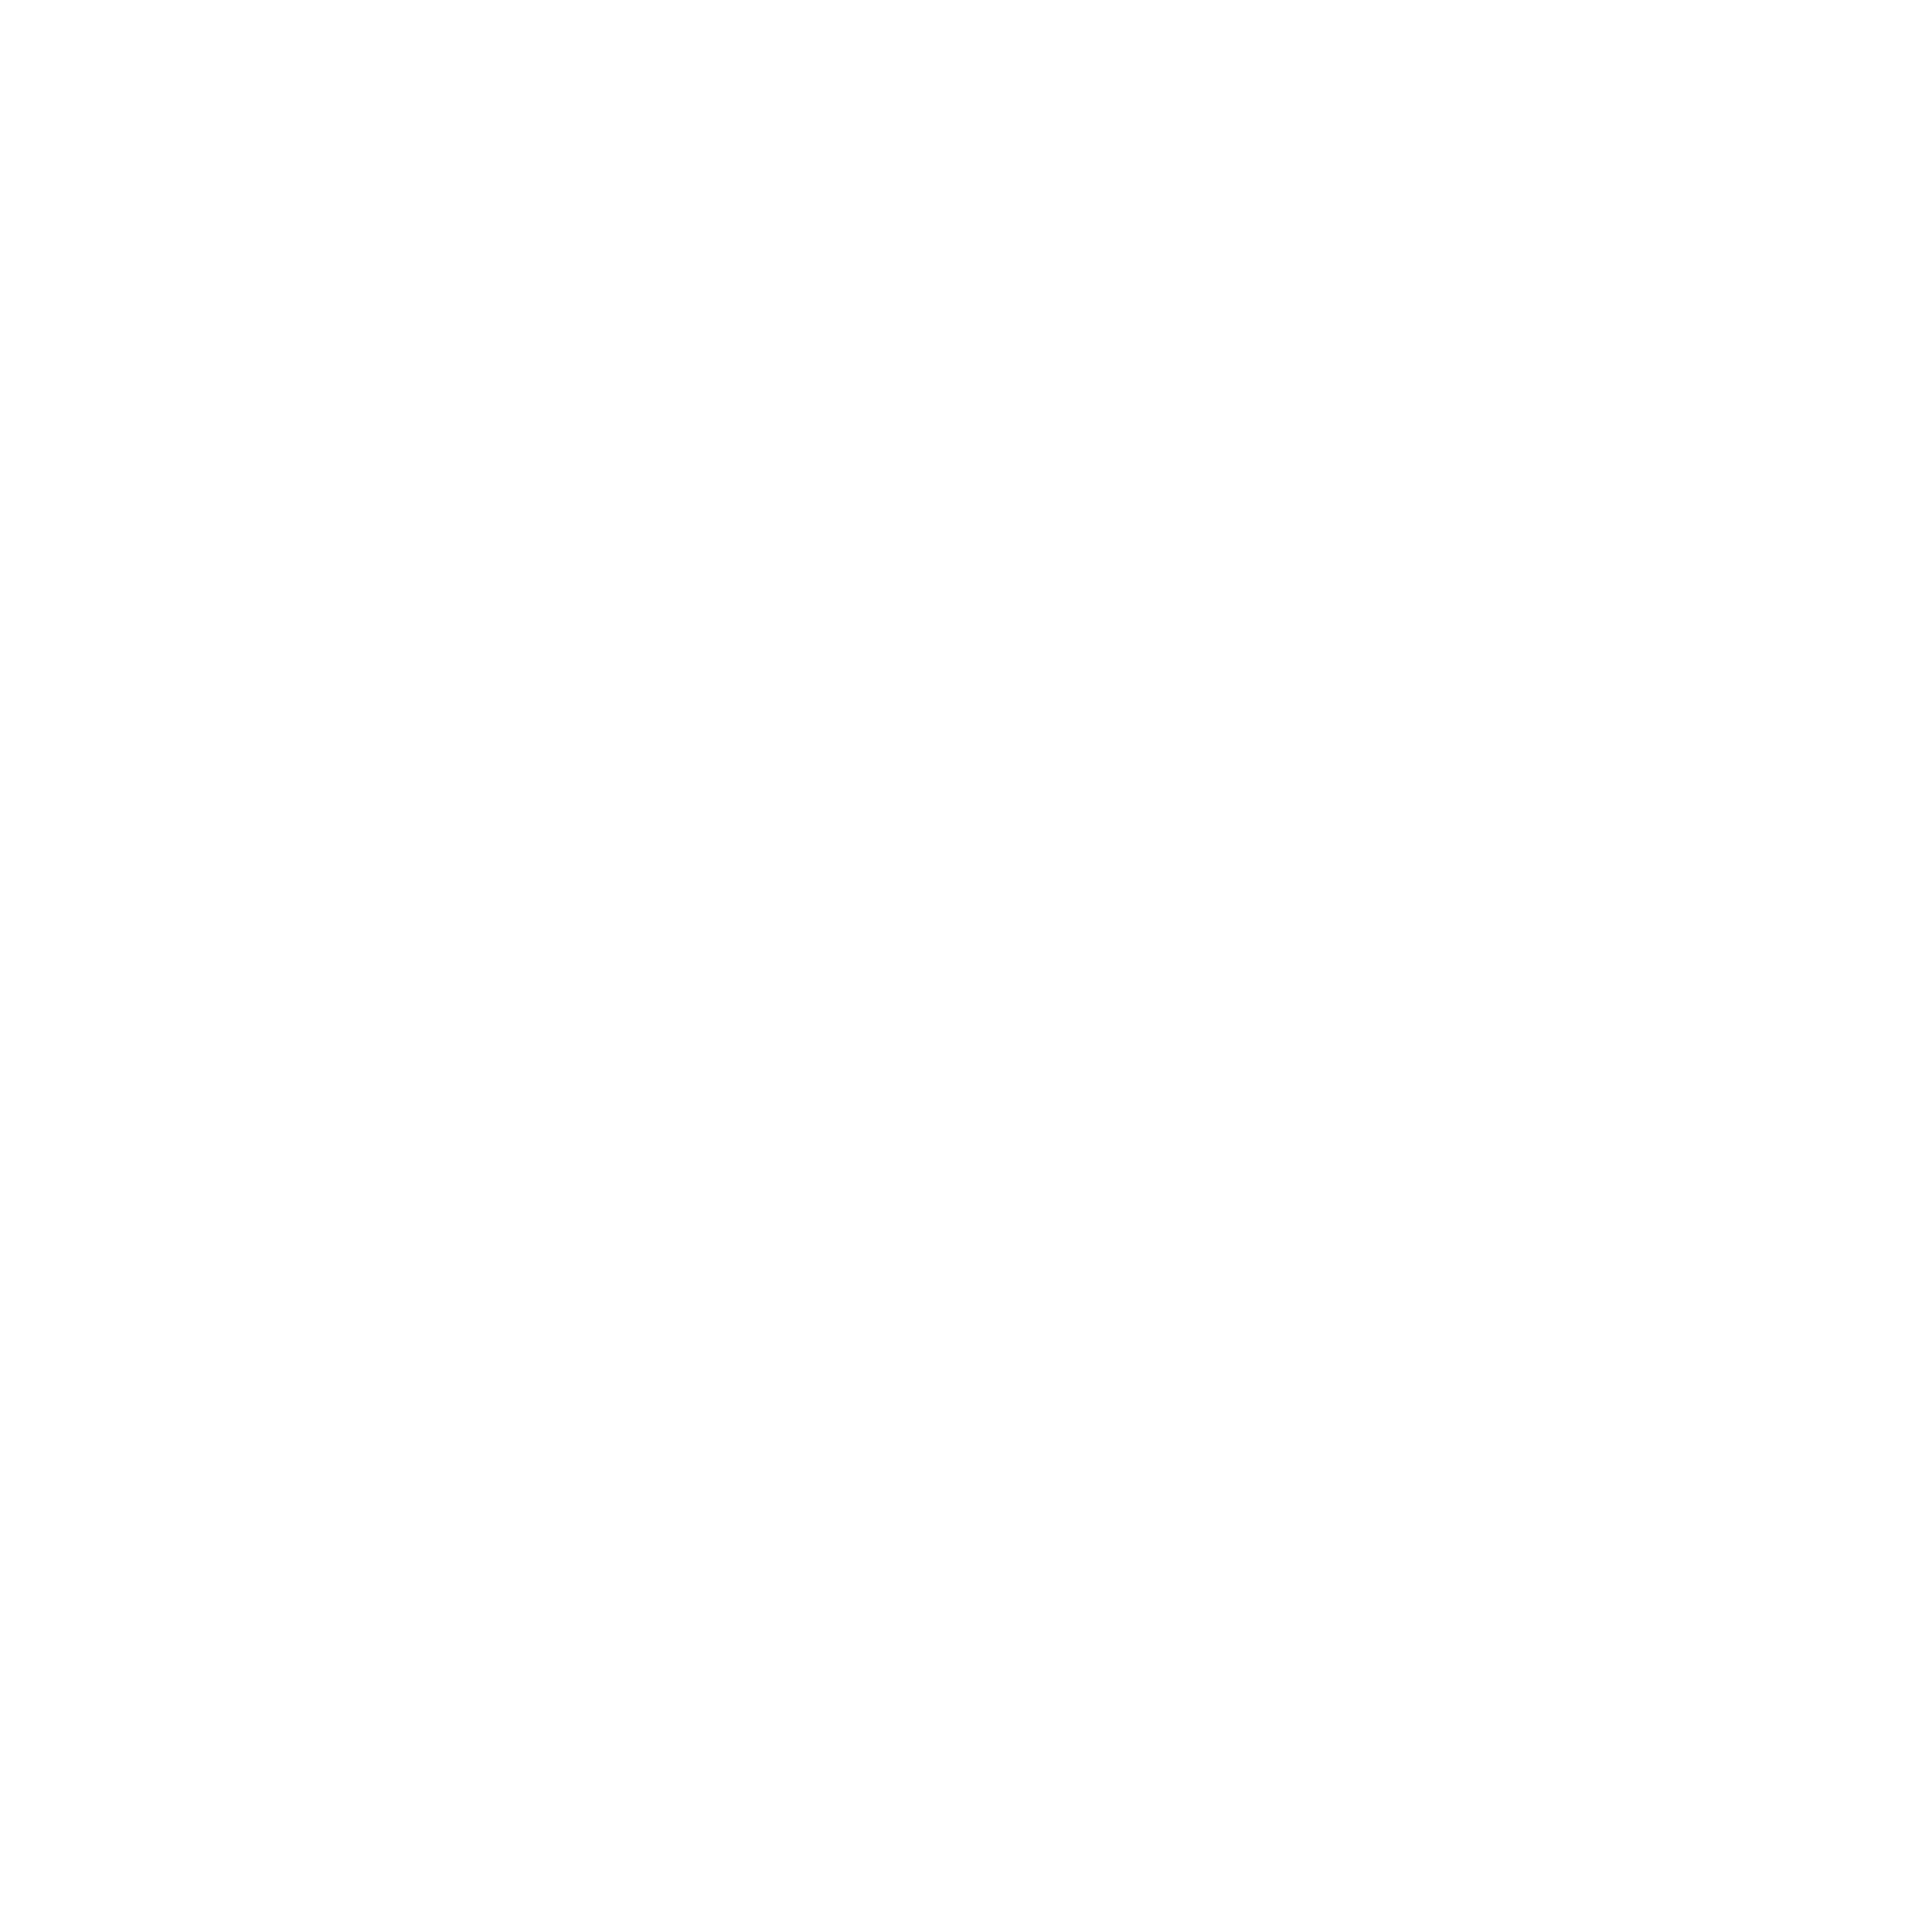 Shutterfly Logo - shutterfly-logo-black-and-white - Total Performance Consulting ...